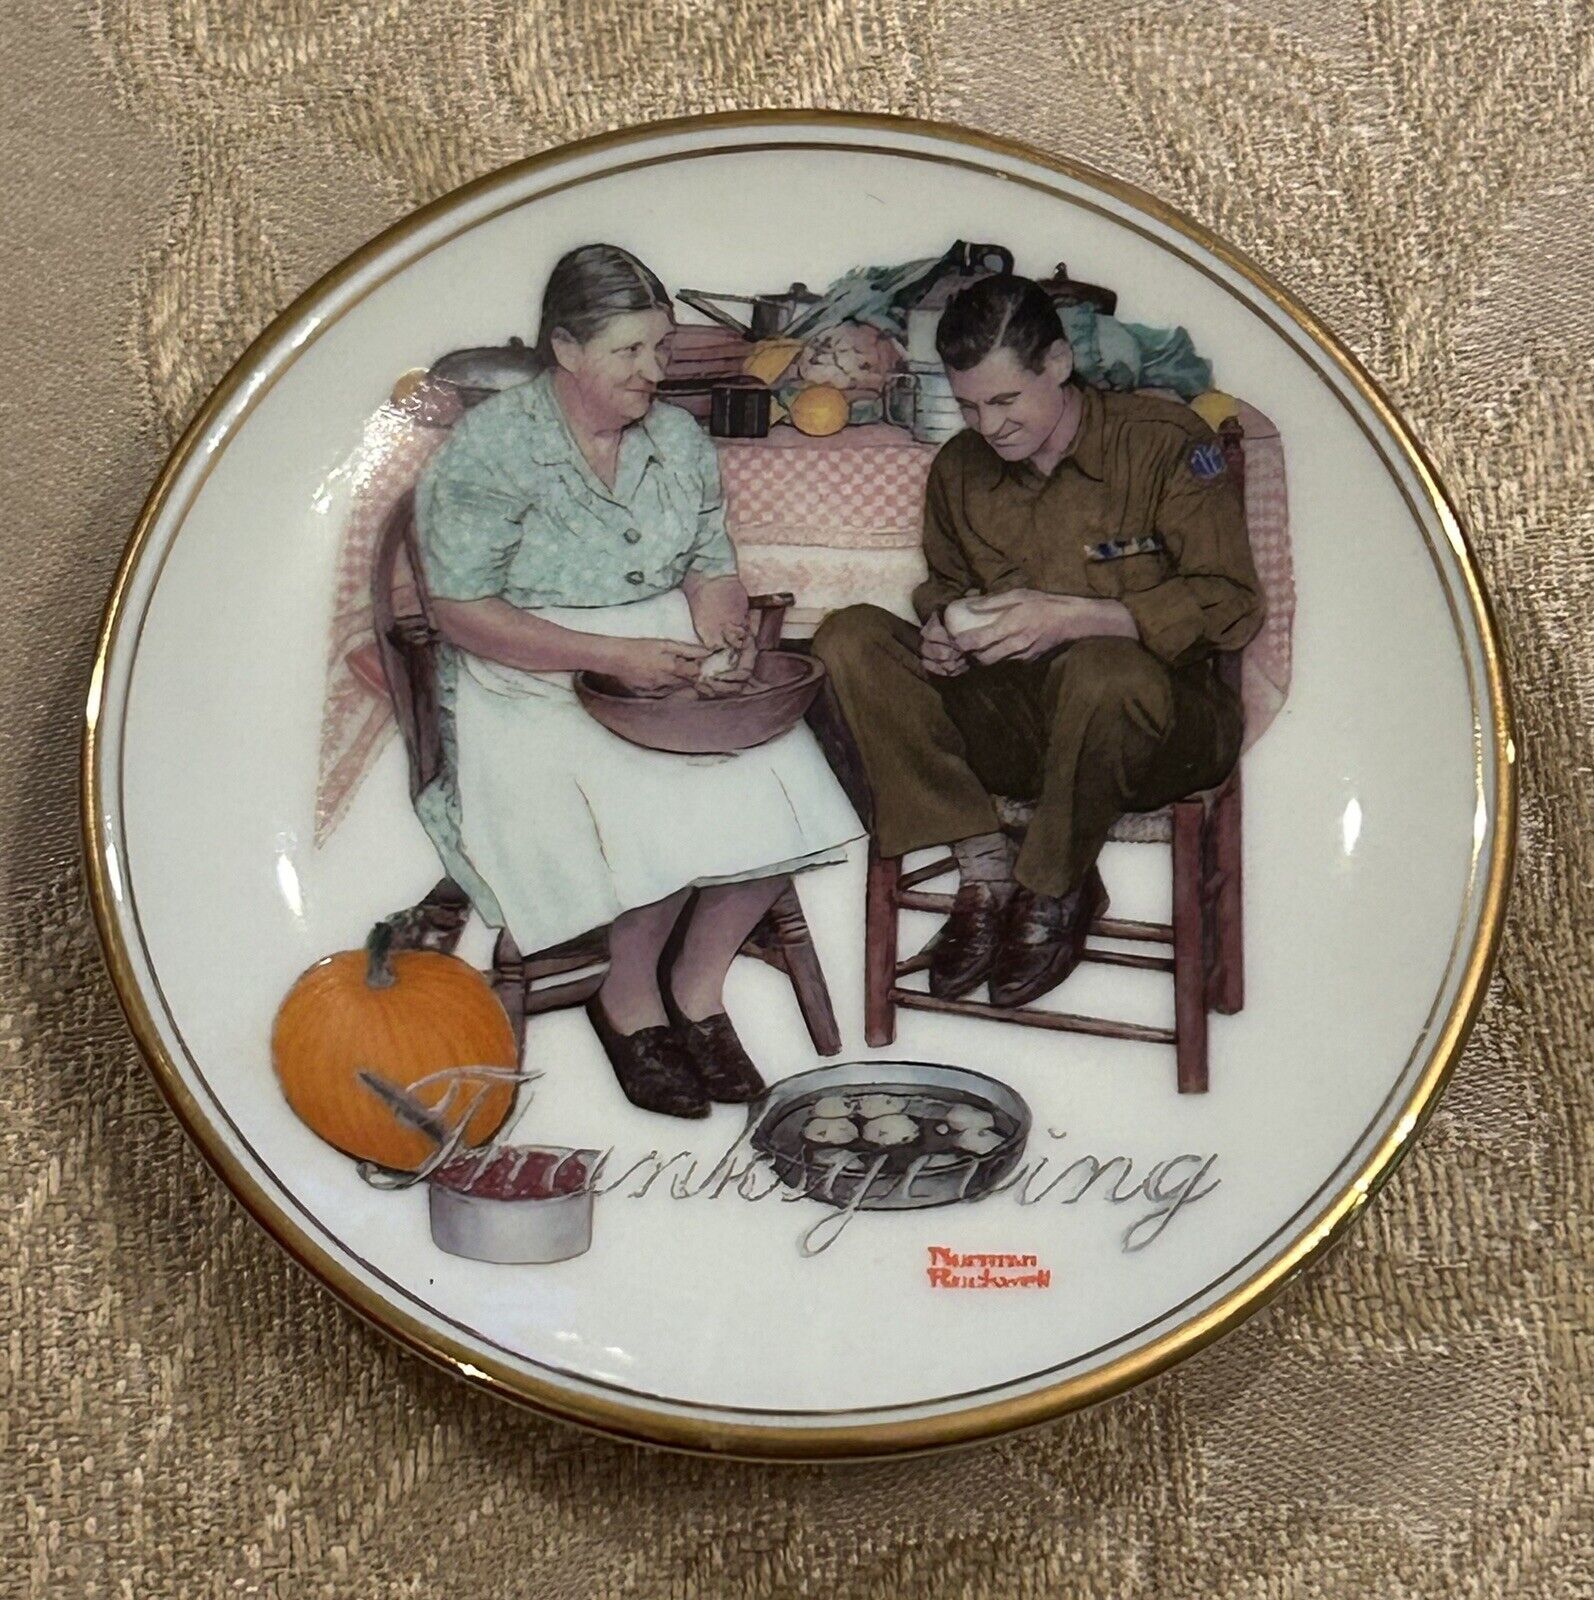 Norman Rockwell Miniature Collector’s Plate  “THANKSGIVING” Vintage D1-30